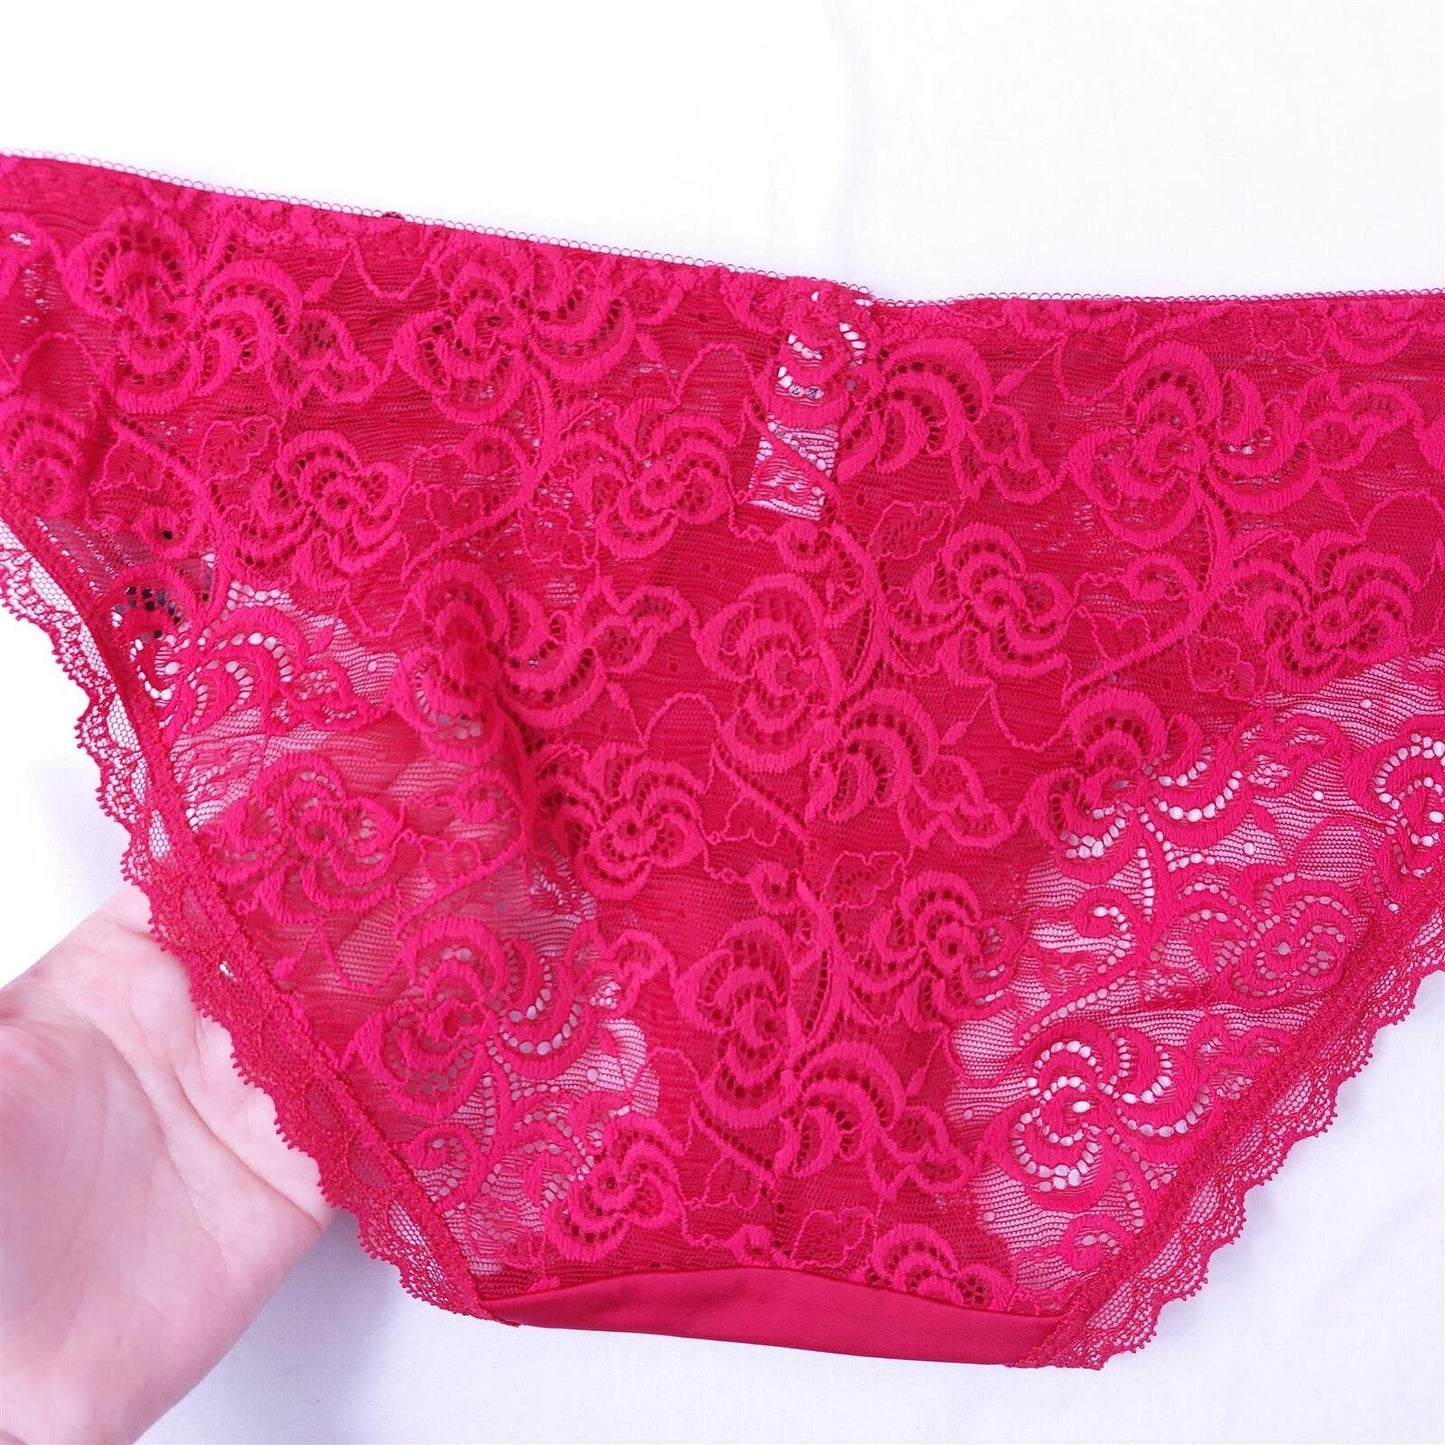 2-Pack Berlei Lace Brief Knickers Comfort Heaven Brand New Passion Red Multipack